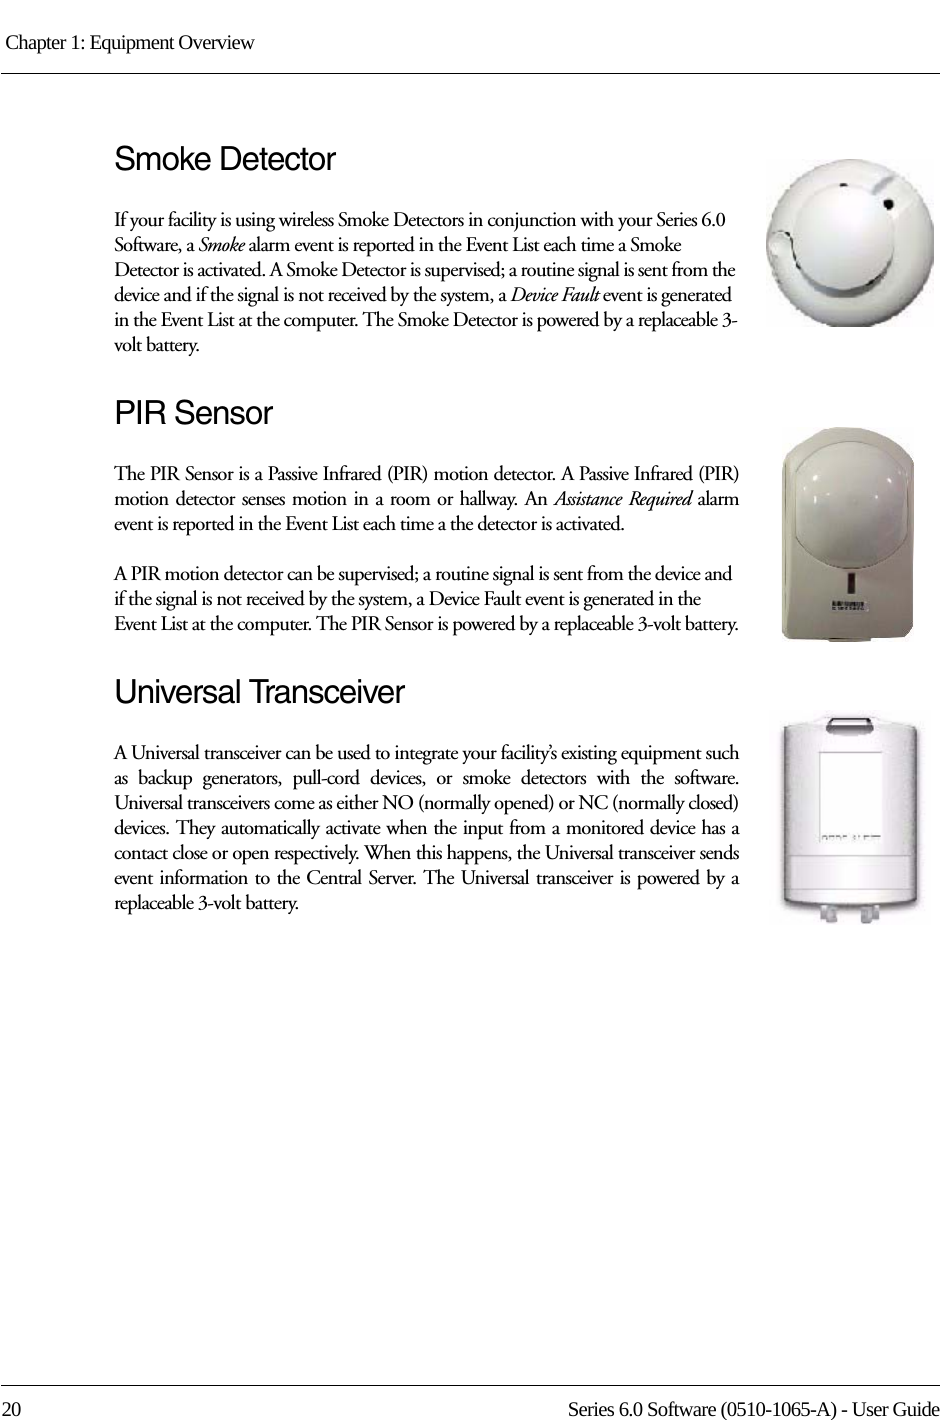 Chapter 1: Equipment Overview 20 Series 6.0 Software (0510-1065-A) - User GuideSmoke DetectorIf your facility is using wireless Smoke Detectors in conjunction with your Series 6.0 Software, a Smoke alarm event is reported in the Event List each time a Smoke Detector is activated. A Smoke Detector is supervised; a routine signal is sent from the device and if the signal is not received by the system, a Device Fault event is generated in the Event List at the computer. The Smoke Detector is powered by a replaceable 3-volt battery.PIR SensorThe PIR Sensor is a Passive Infrared (PIR) motion detector. A Passive Infrared (PIR) motion detector senses motion in a room or hallway. An Assistance Required alarm event is reported in the Event List each time a the detector is activated. A PIR motion detector can be supervised; a routine signal is sent from the device and if the signal is not received by the system, a Device Fault event is generated in the Event List at the computer. The PIR Sensor is powered by a replaceable 3-volt battery.Universal TransceiverA Universal transceiver can be used to integrate your facility’s existing equipment such as backup generators, pull-cord devices, or smoke detectors with the software. Universal transceivers come as either NO (normally opened) or NC (normally closed) devices. They automatically activate when the input from a monitored device has a contact close or open respectively. When this happens, the Universal transceiver sends event information to the Central Server. The Universal transceiver is powered by a replaceable 3-volt battery.